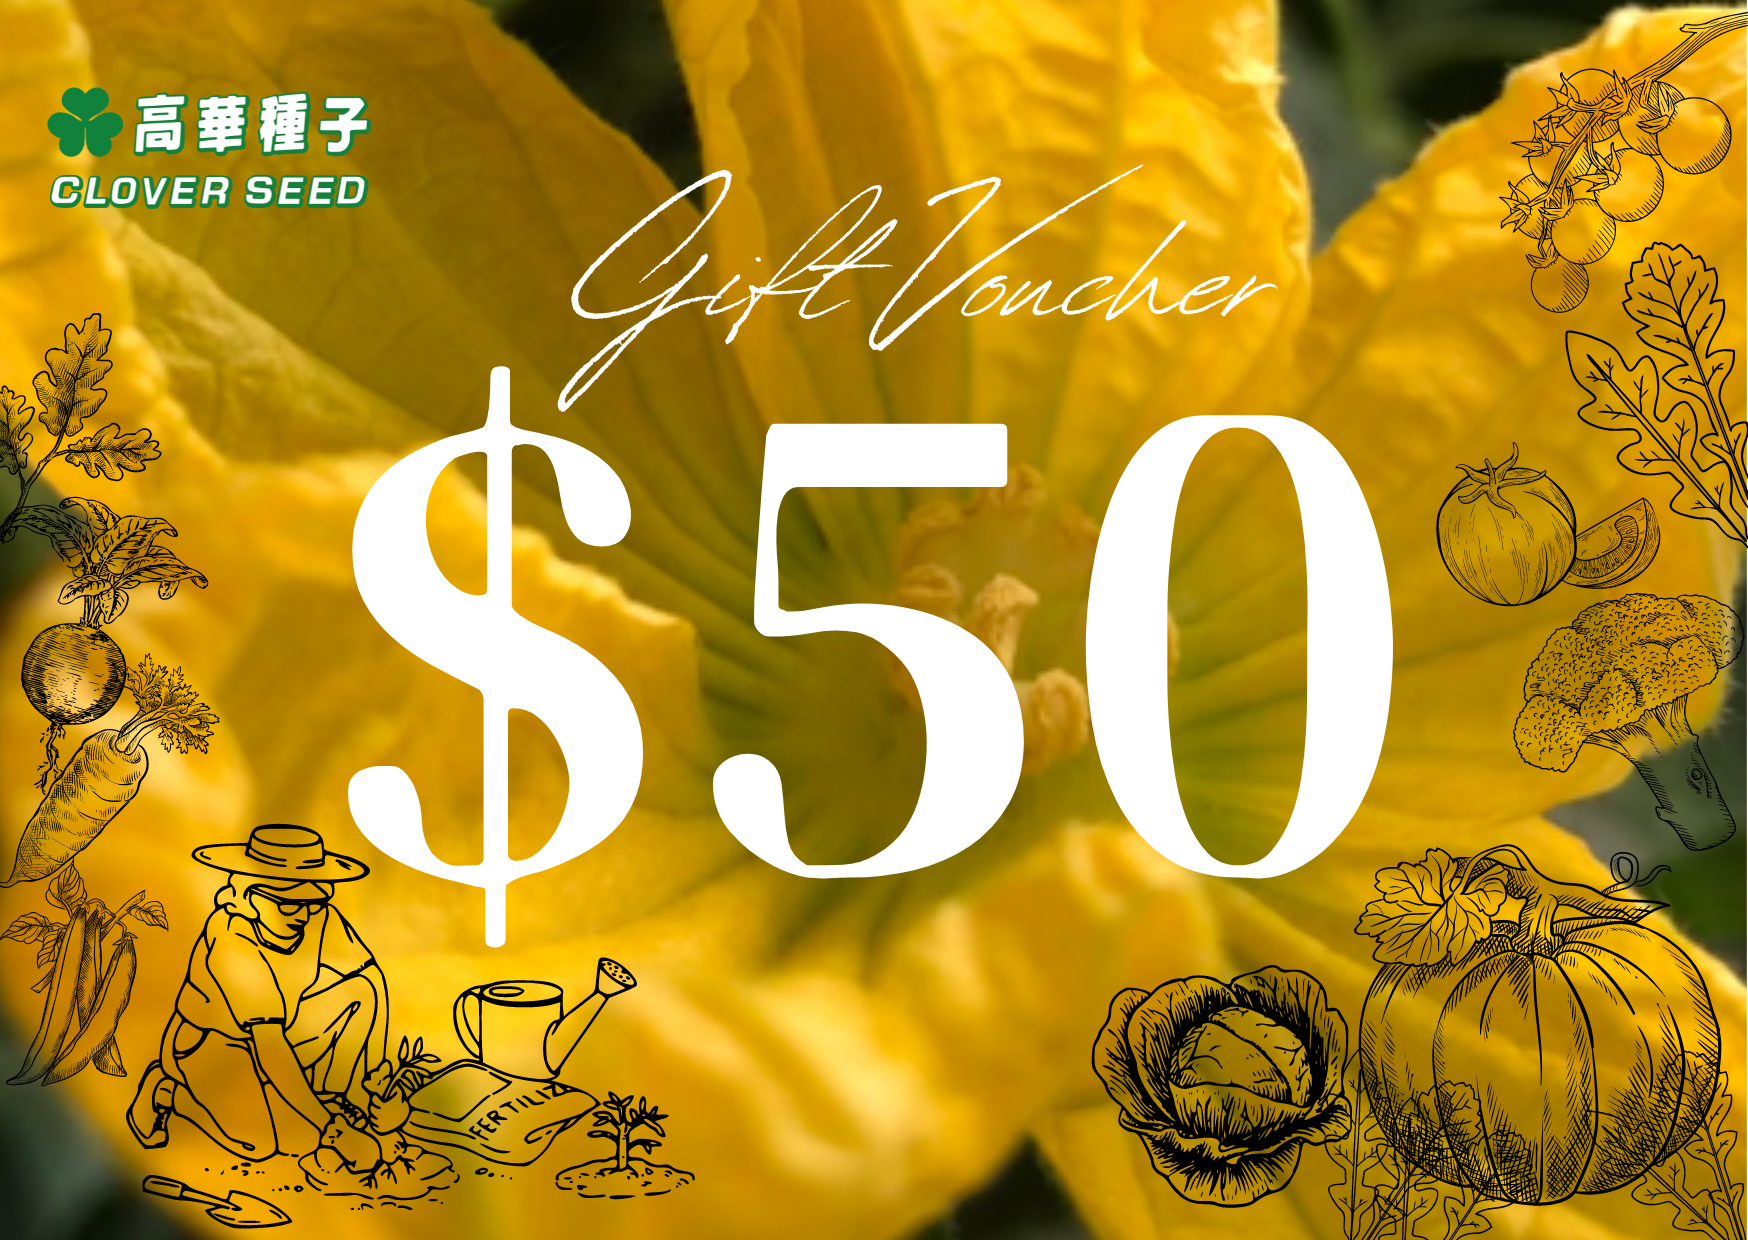 $50 Clover Seed Gift Card